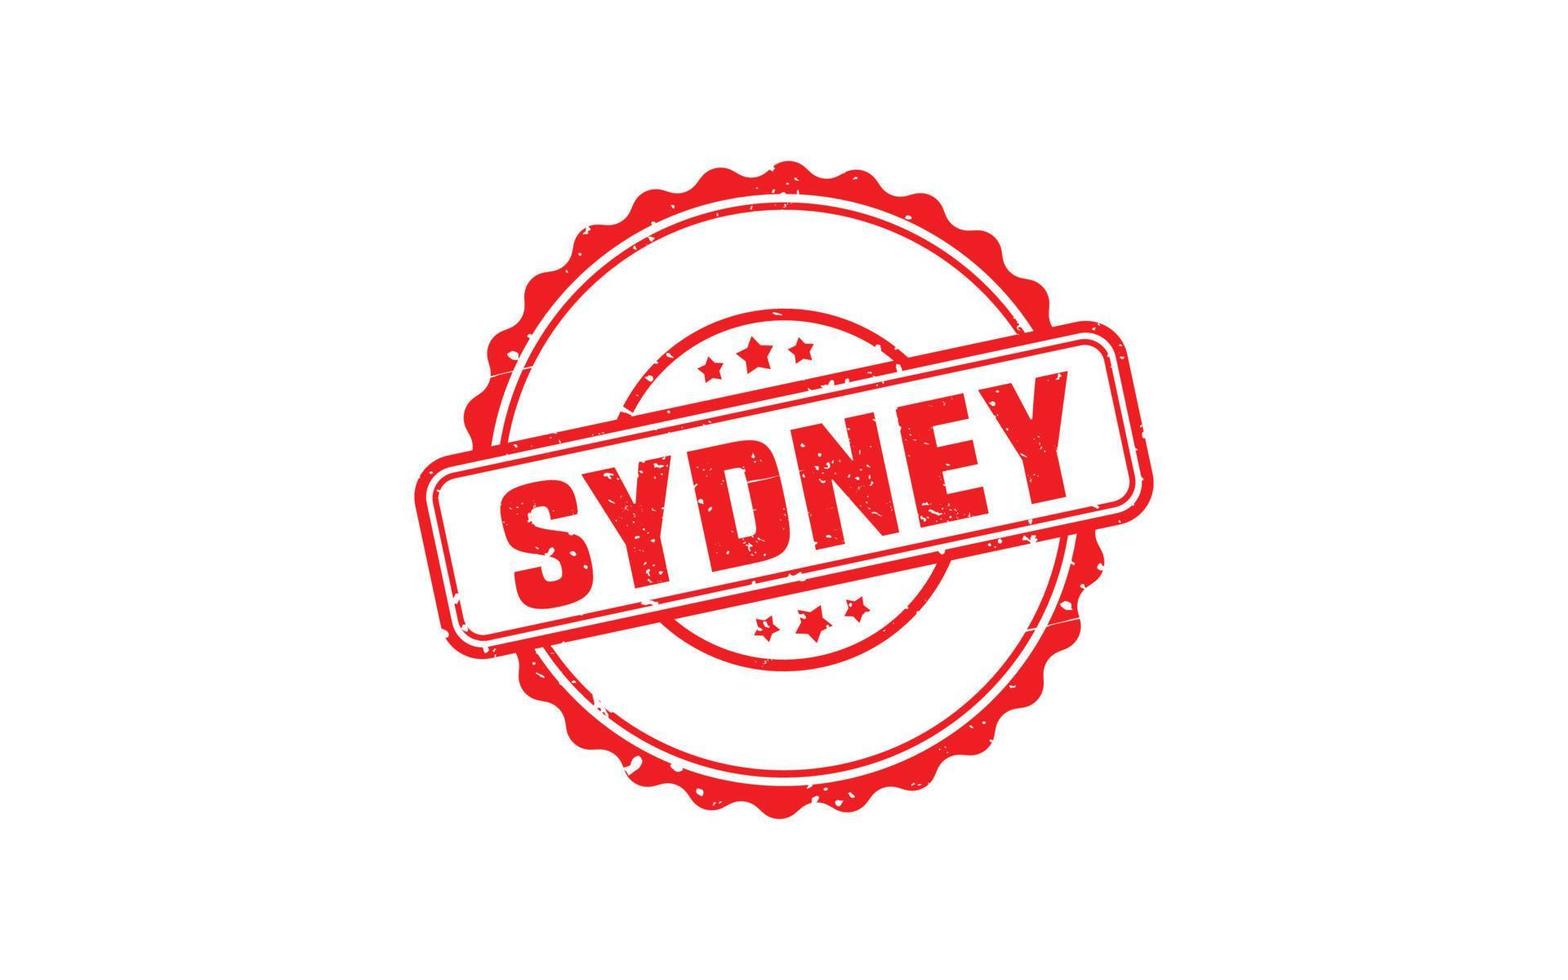 SYDNEY AUSTRALIA rubber stamp with grunge style on white background vector